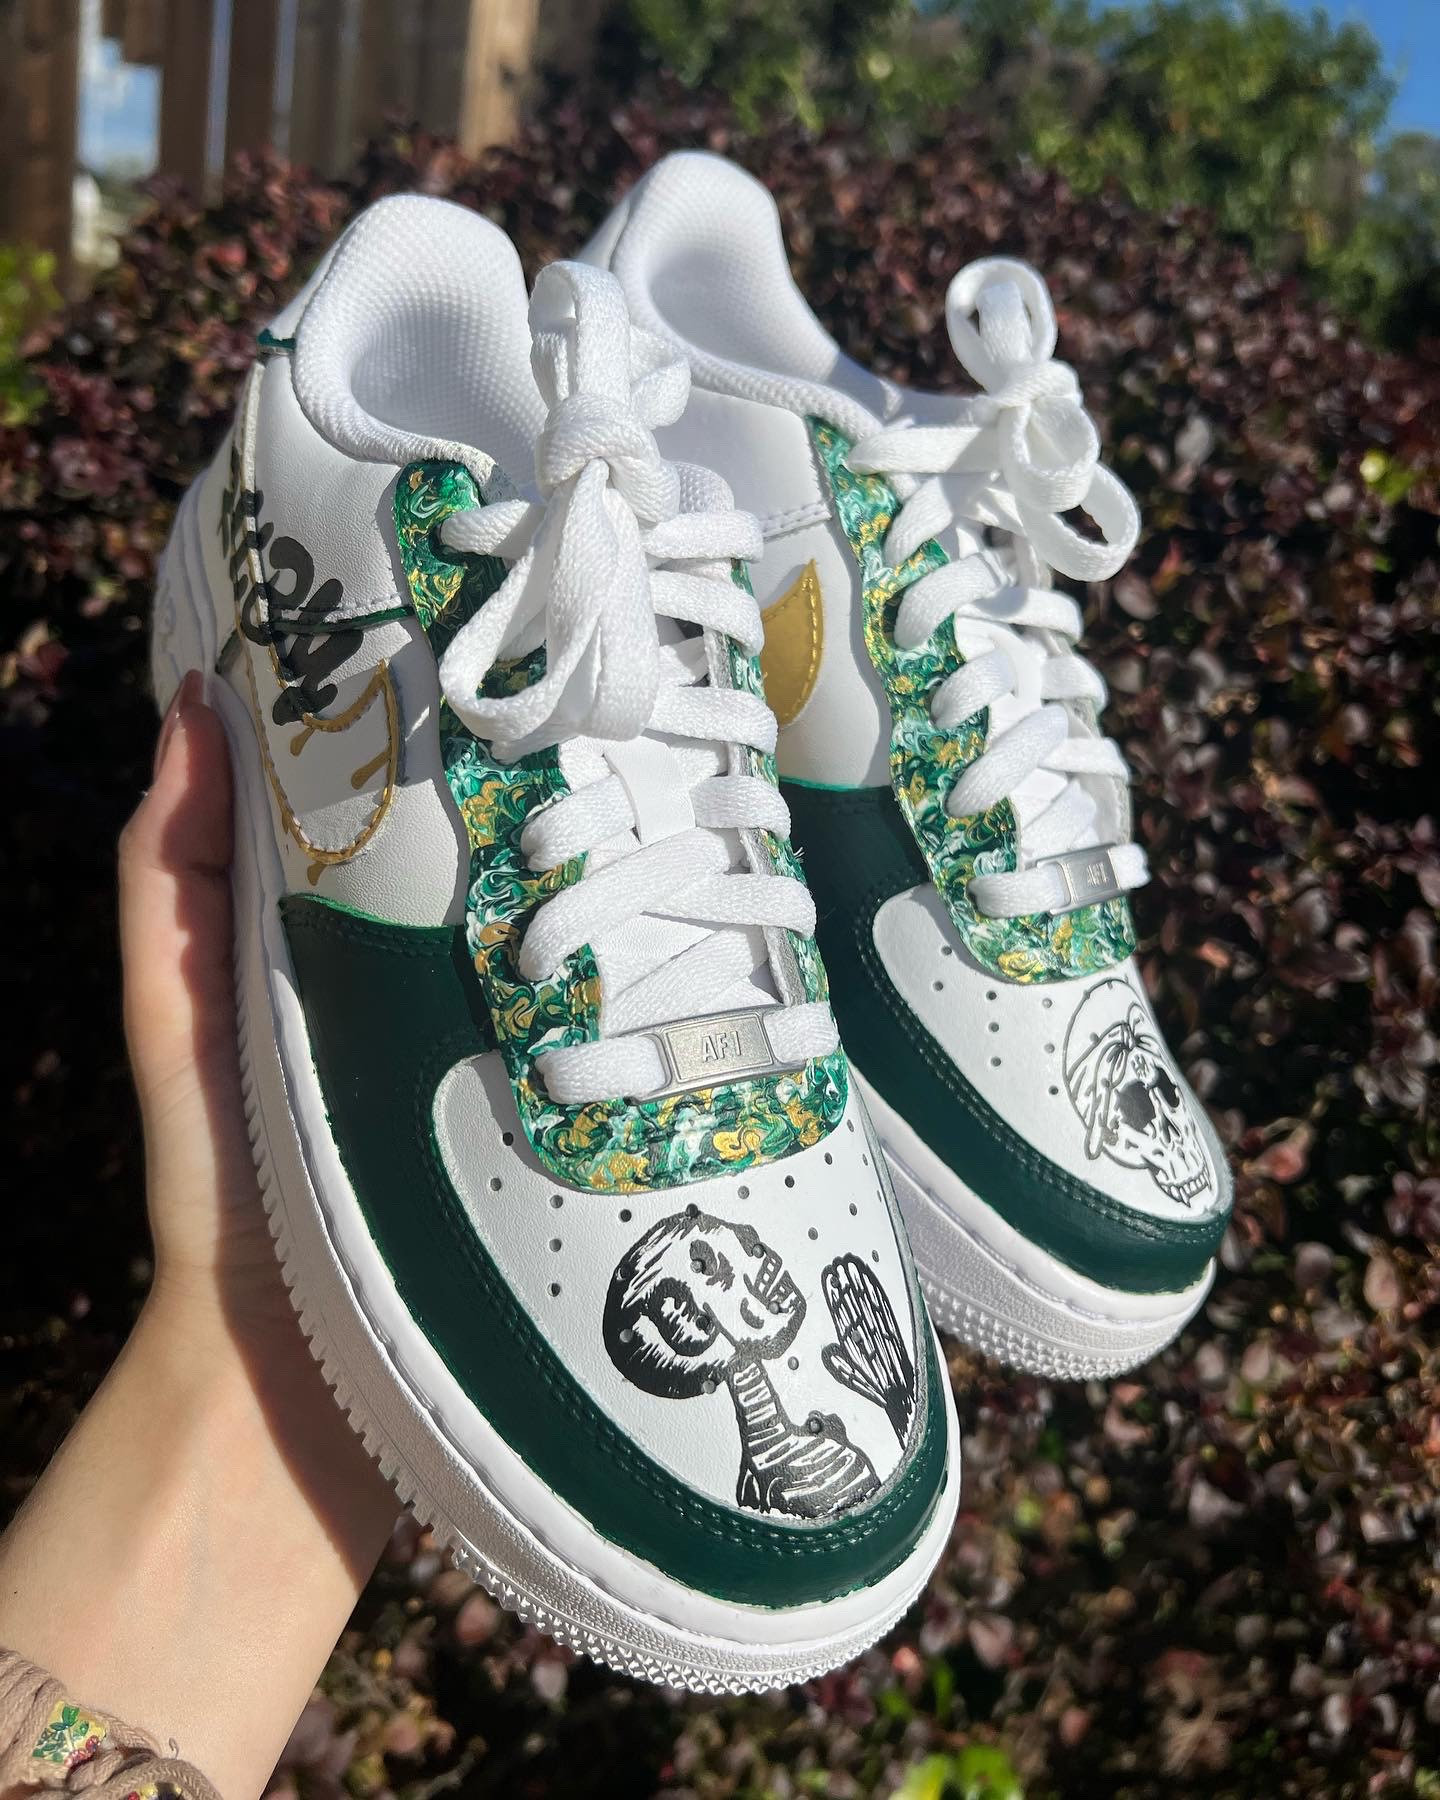 Custom Painted St Louis Nike Air Force One Shoes 1 Of 20 Pairs - Mens Size  12